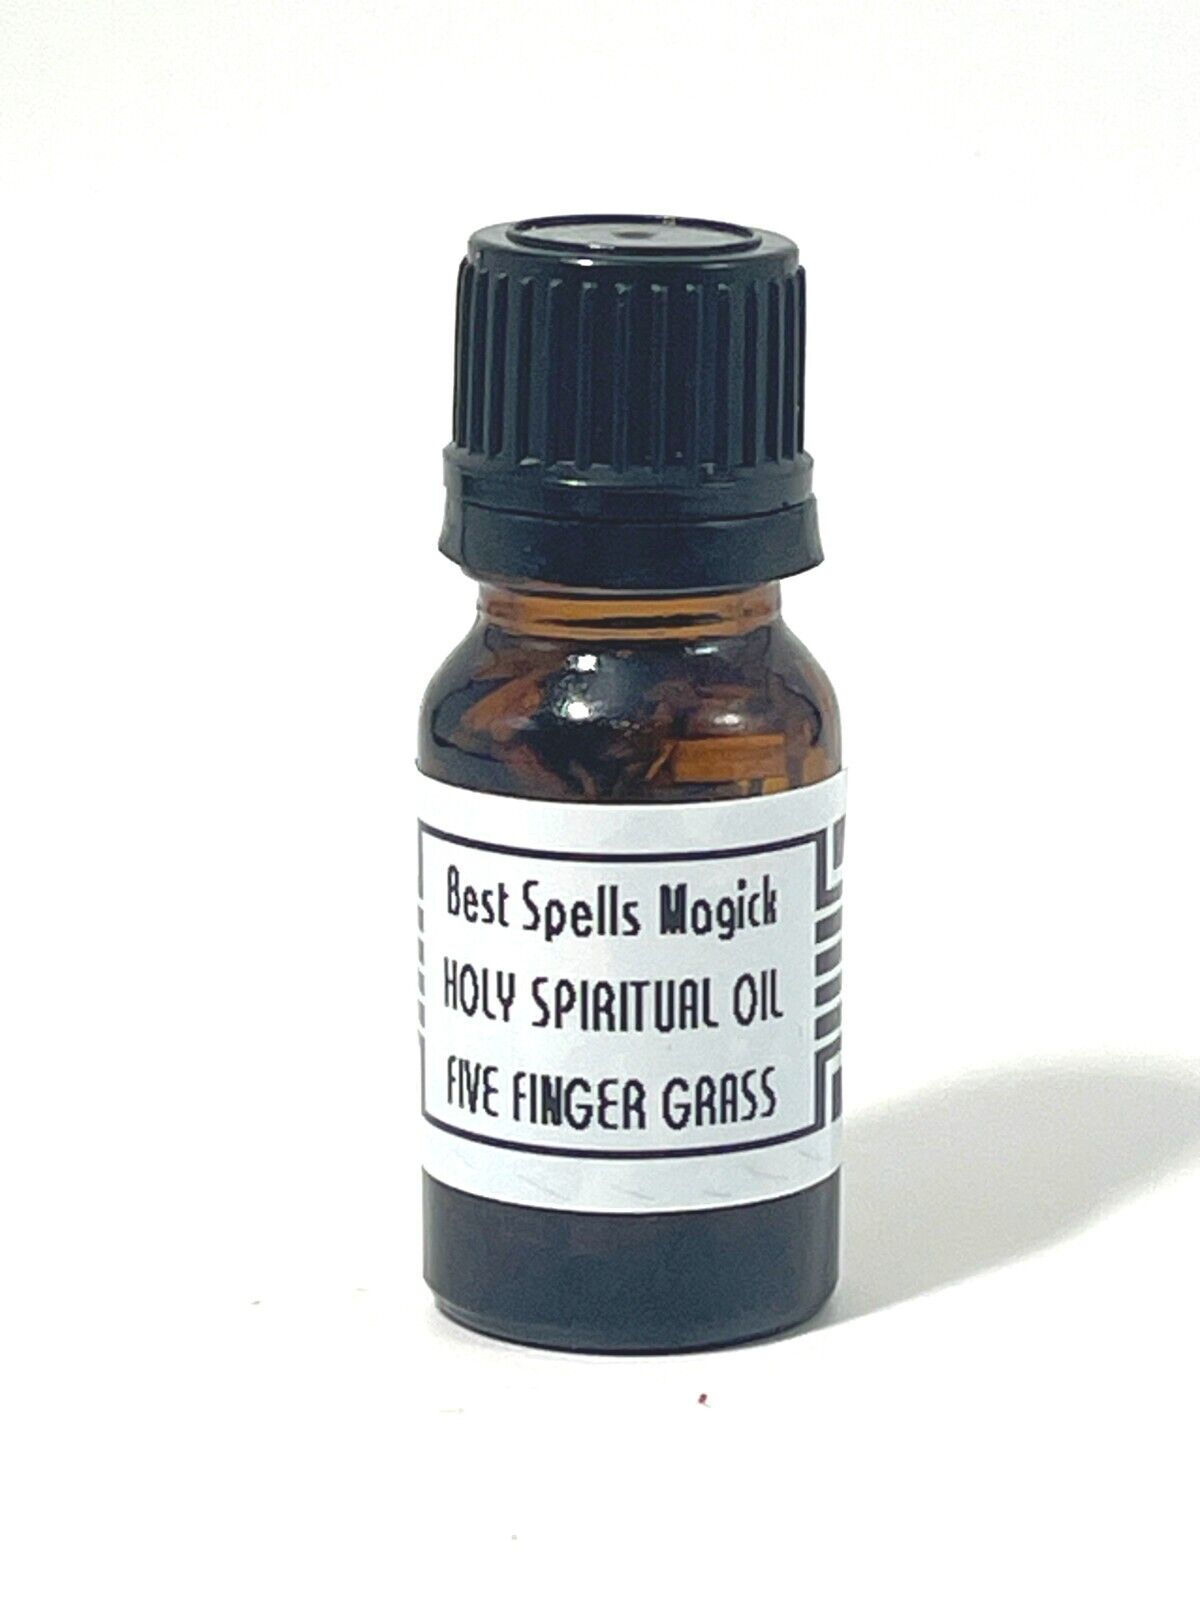 FIVE FINGER GRASS /Holy Biblical Anointing Oil/LUCK LOVE PROTECTION / Magick